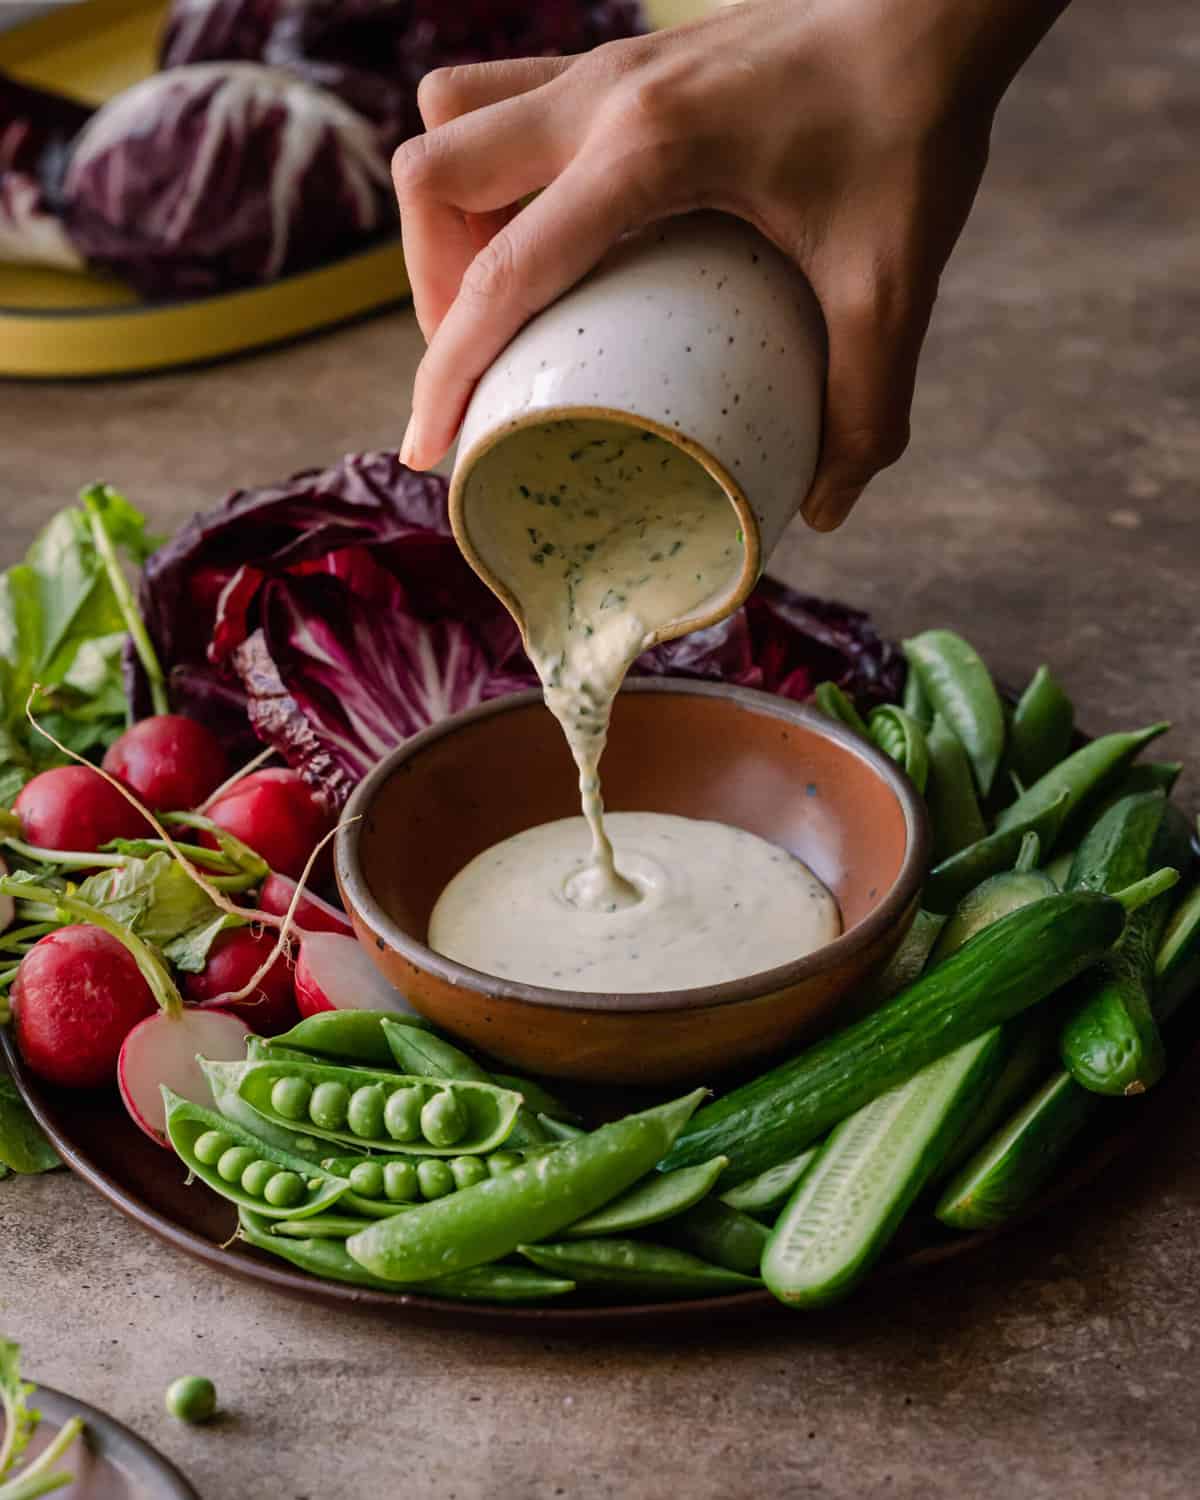 woman's hands pouring a vessel of vegan ranch dressing into a bowl in a crudites platter.